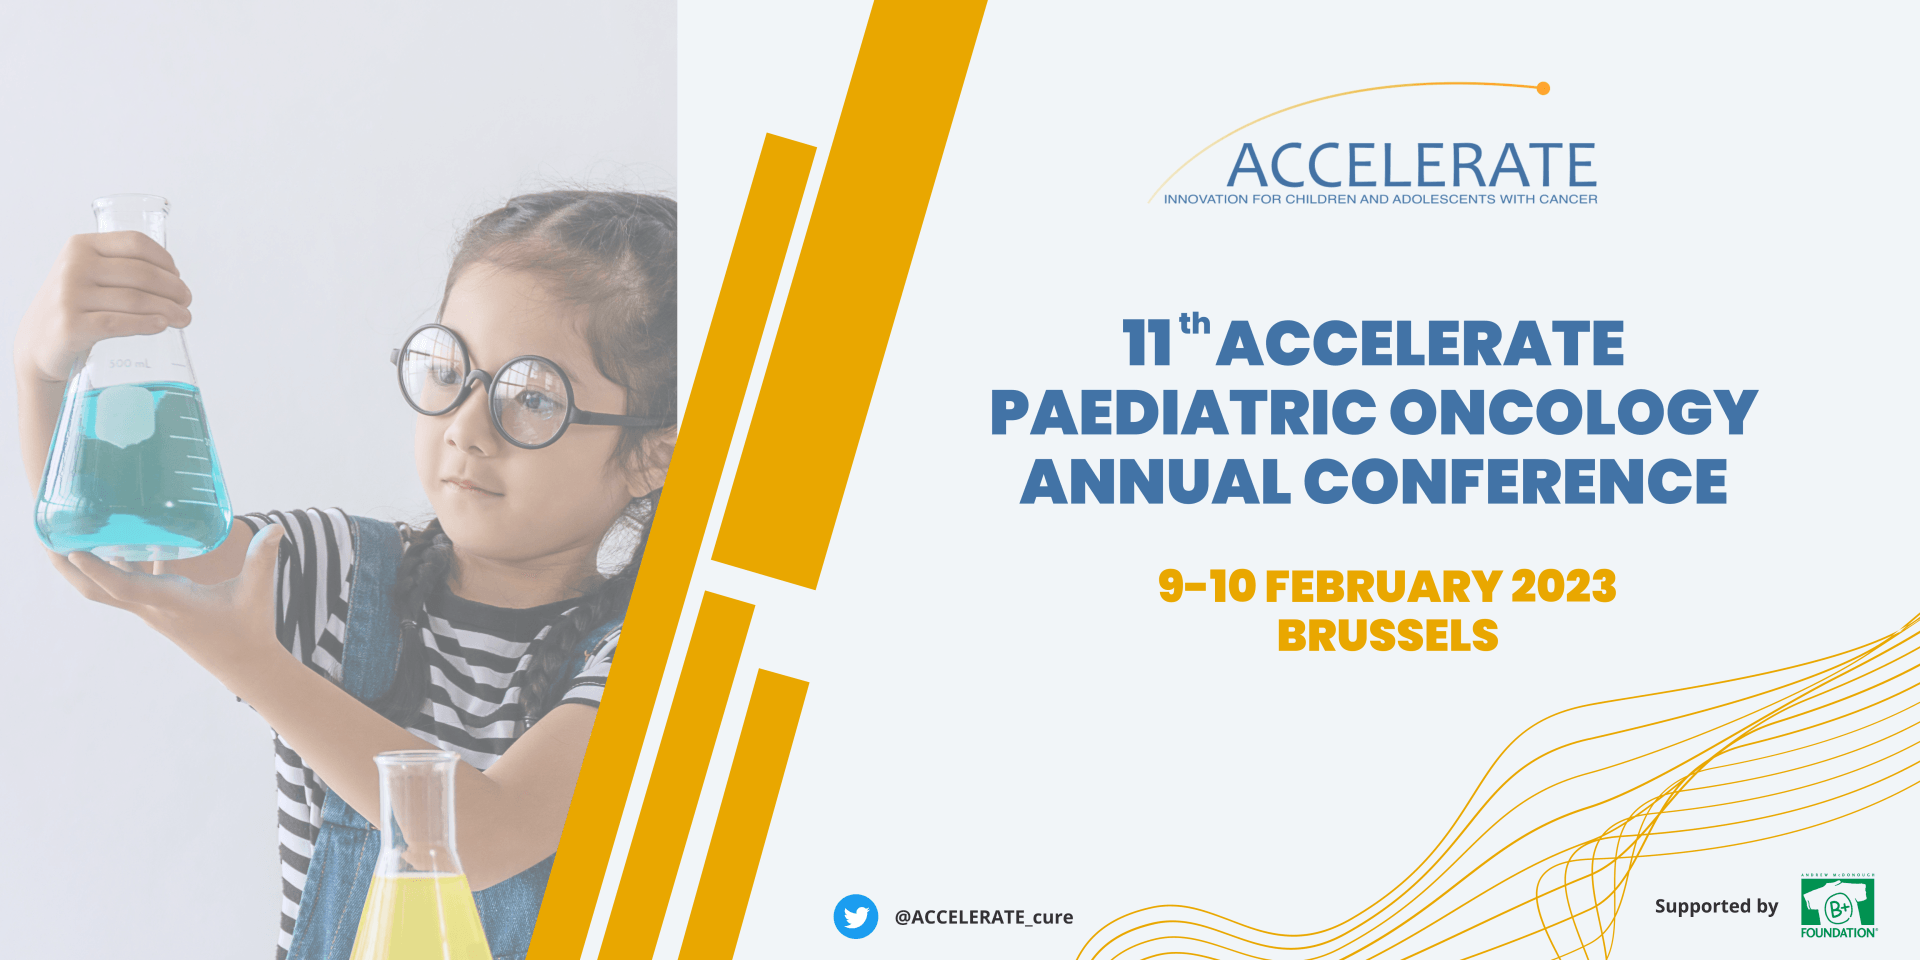 ACCELERATE Paediatric Oncology Conferences